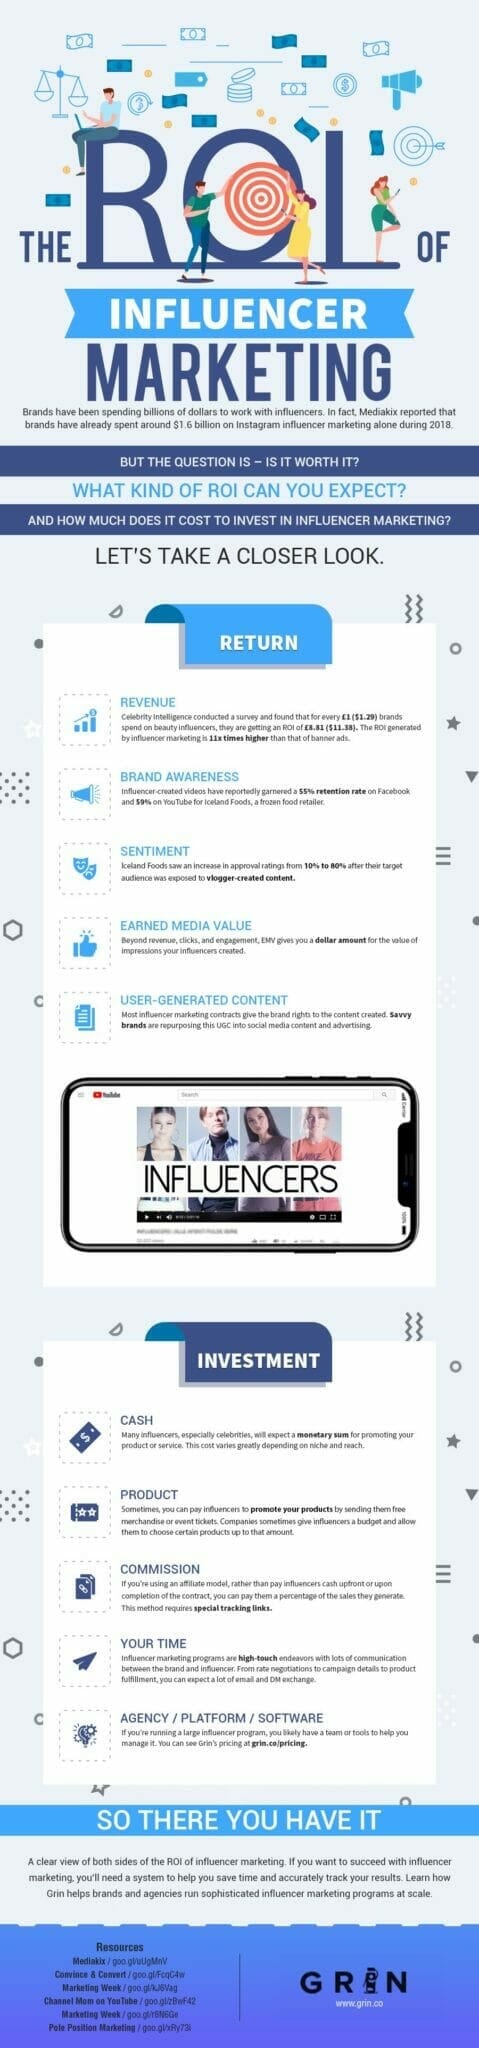 ROI-of-Influencer-Marketing-infographic-1